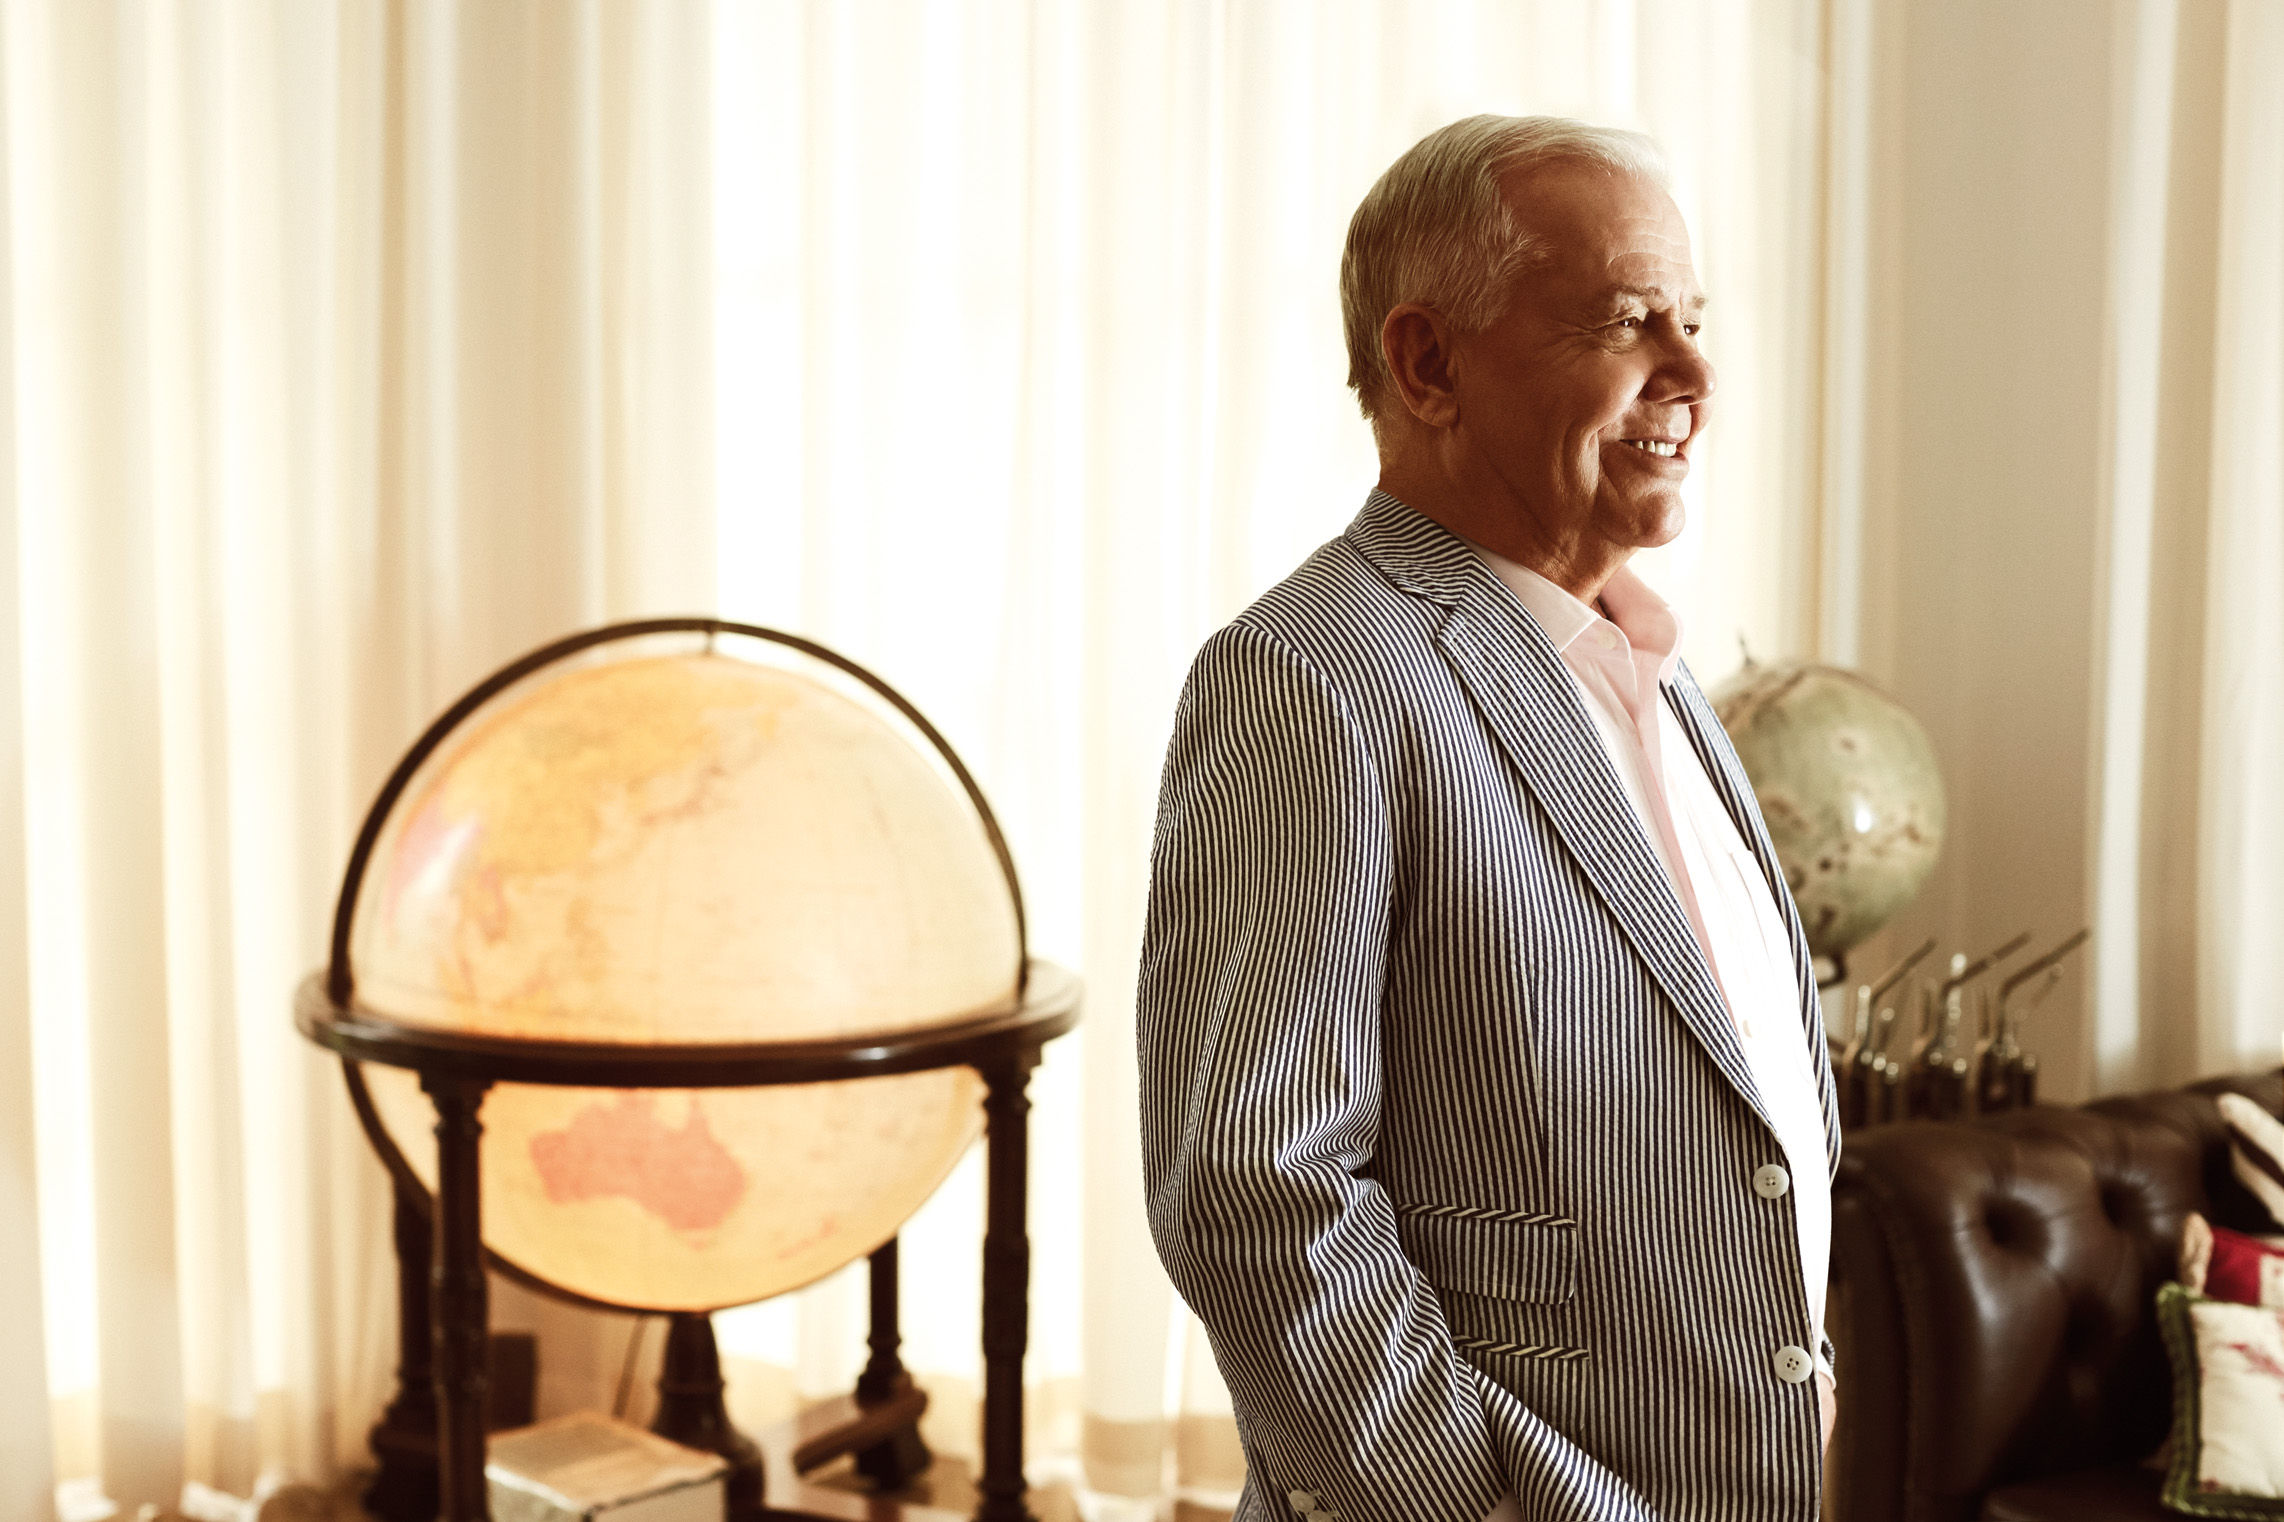 Jim Rogers takes on the #PrestigeQuestionnaire